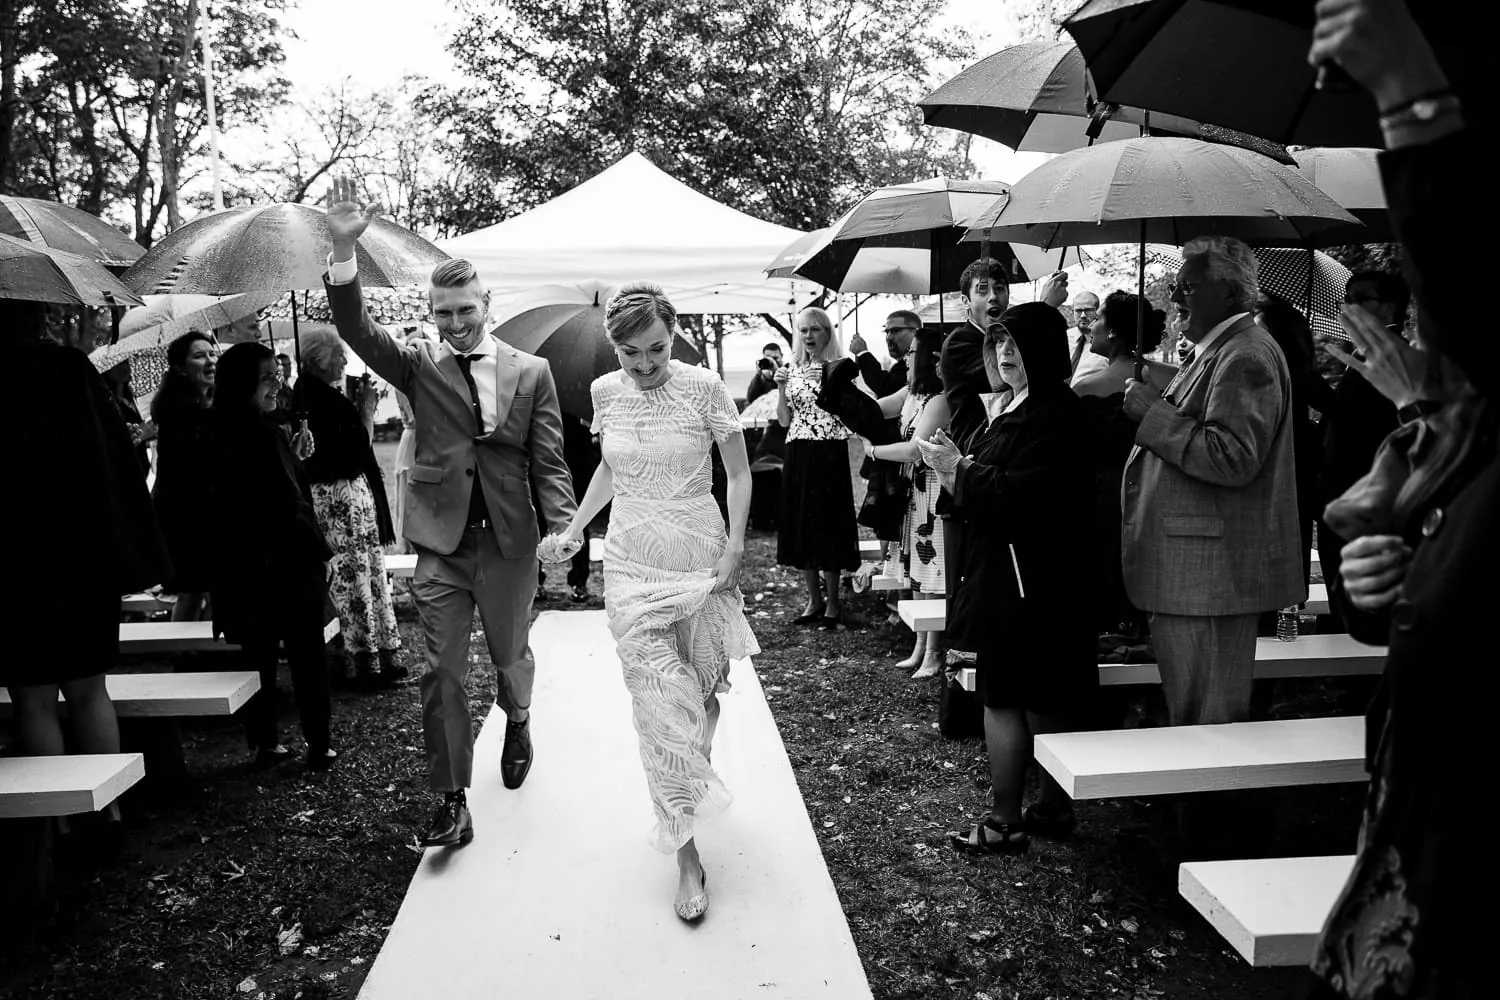 A bride and groom run hand in hand through the rain away from their wedding ceremony as guests under umbrellas look on